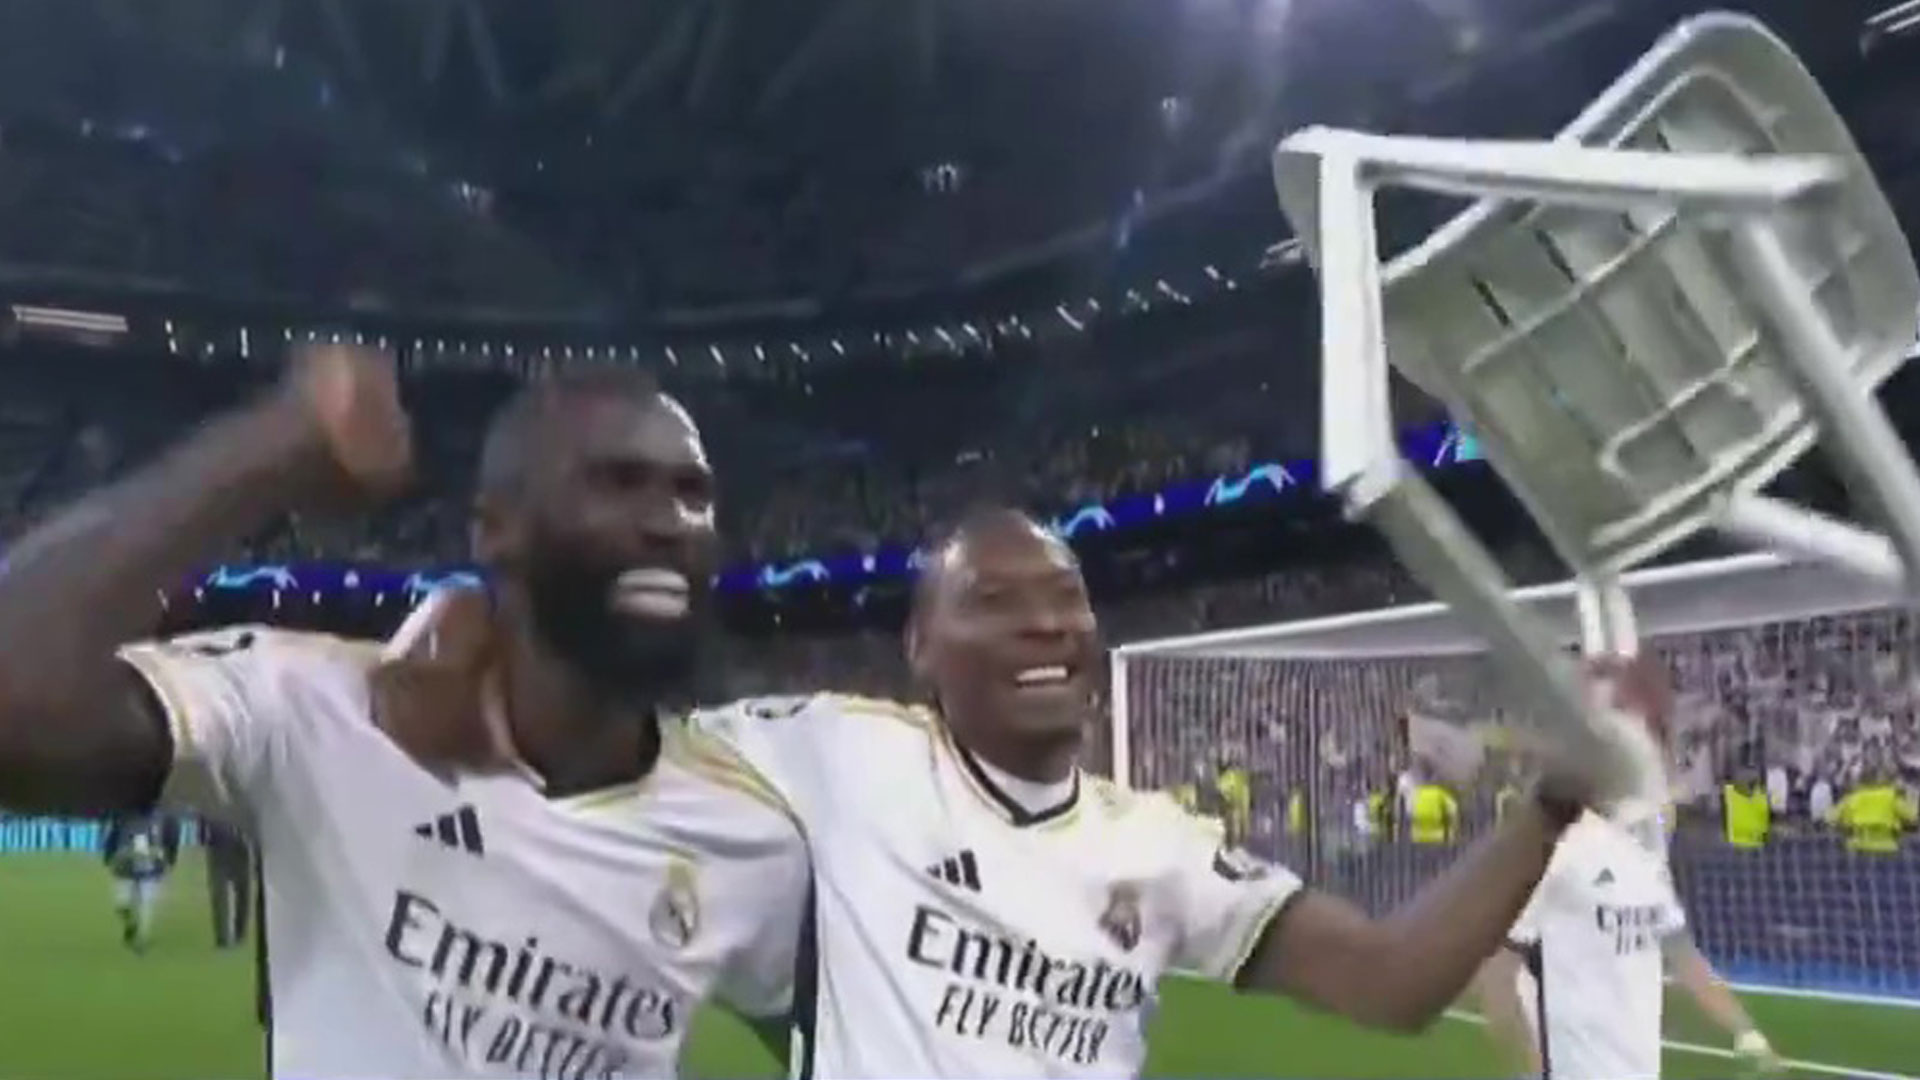 Watch Antonio Rudiger bring back iconic Chelsea chair celebration in wild scenes after Real Madrid win vs Bayern Munich [Video]